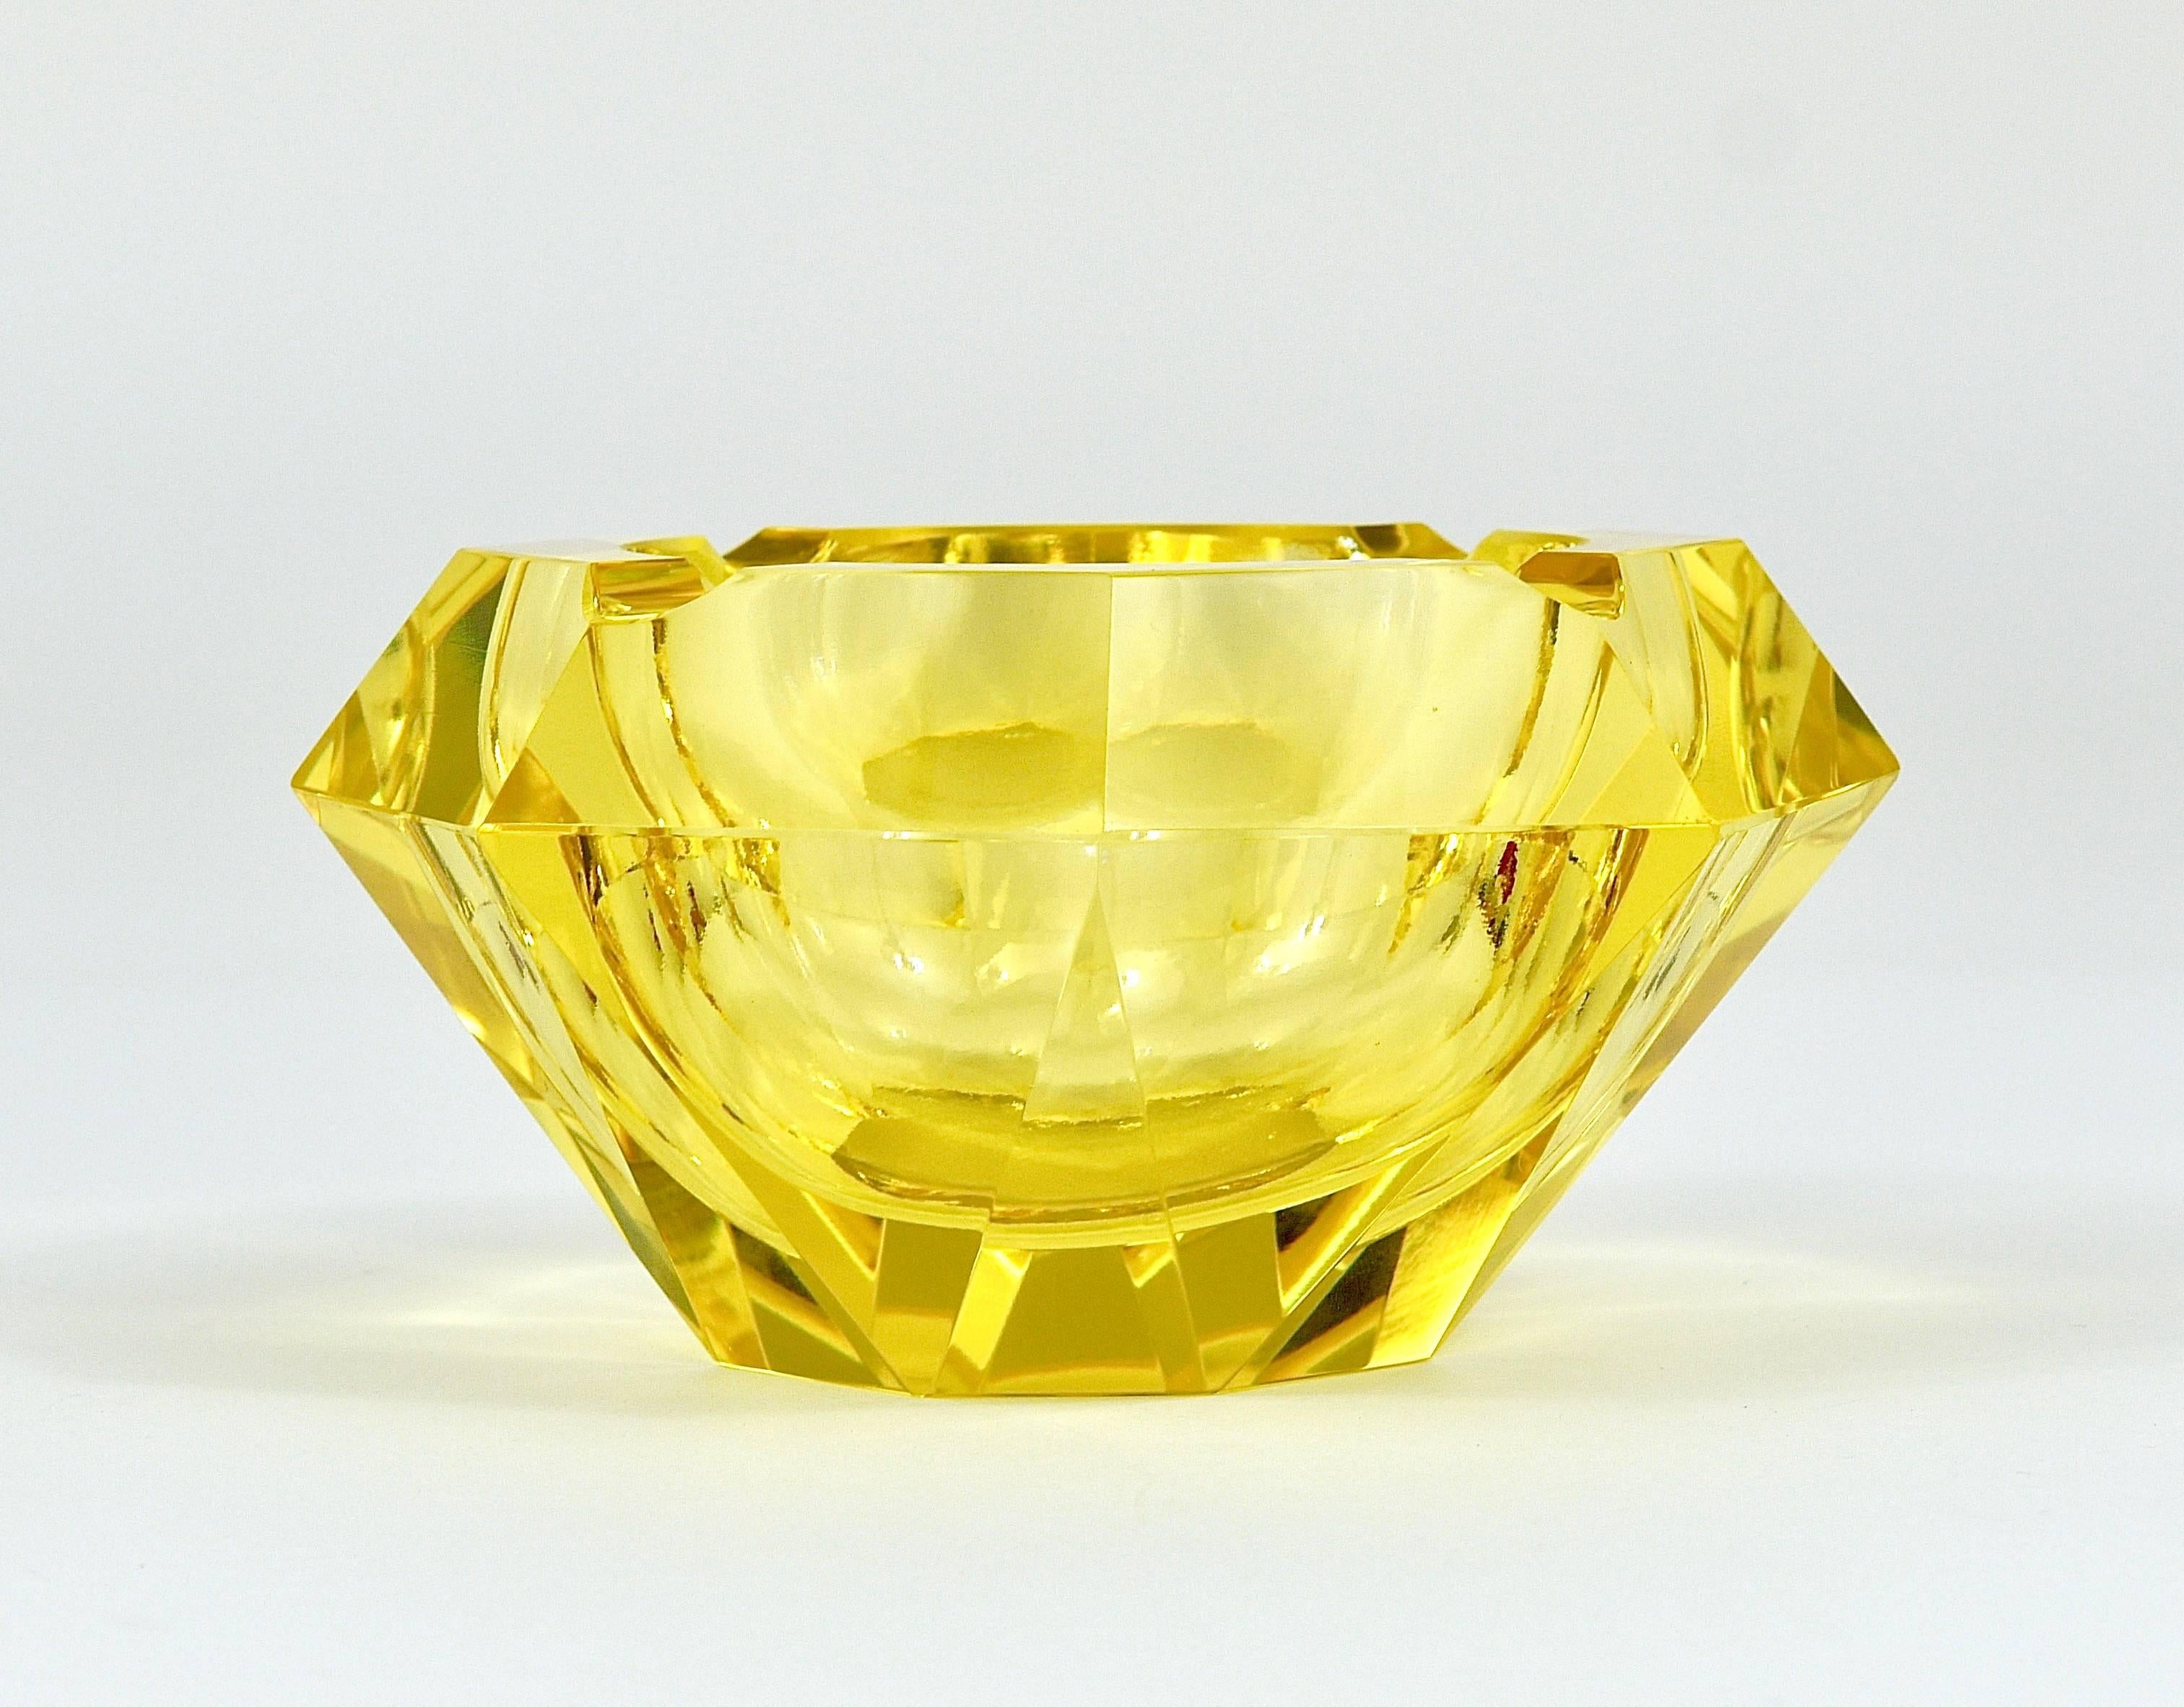 Mid-20th Century 1930s Lemon Faceted Diamond Ashtray in Excellent Condition, Murano, Italy